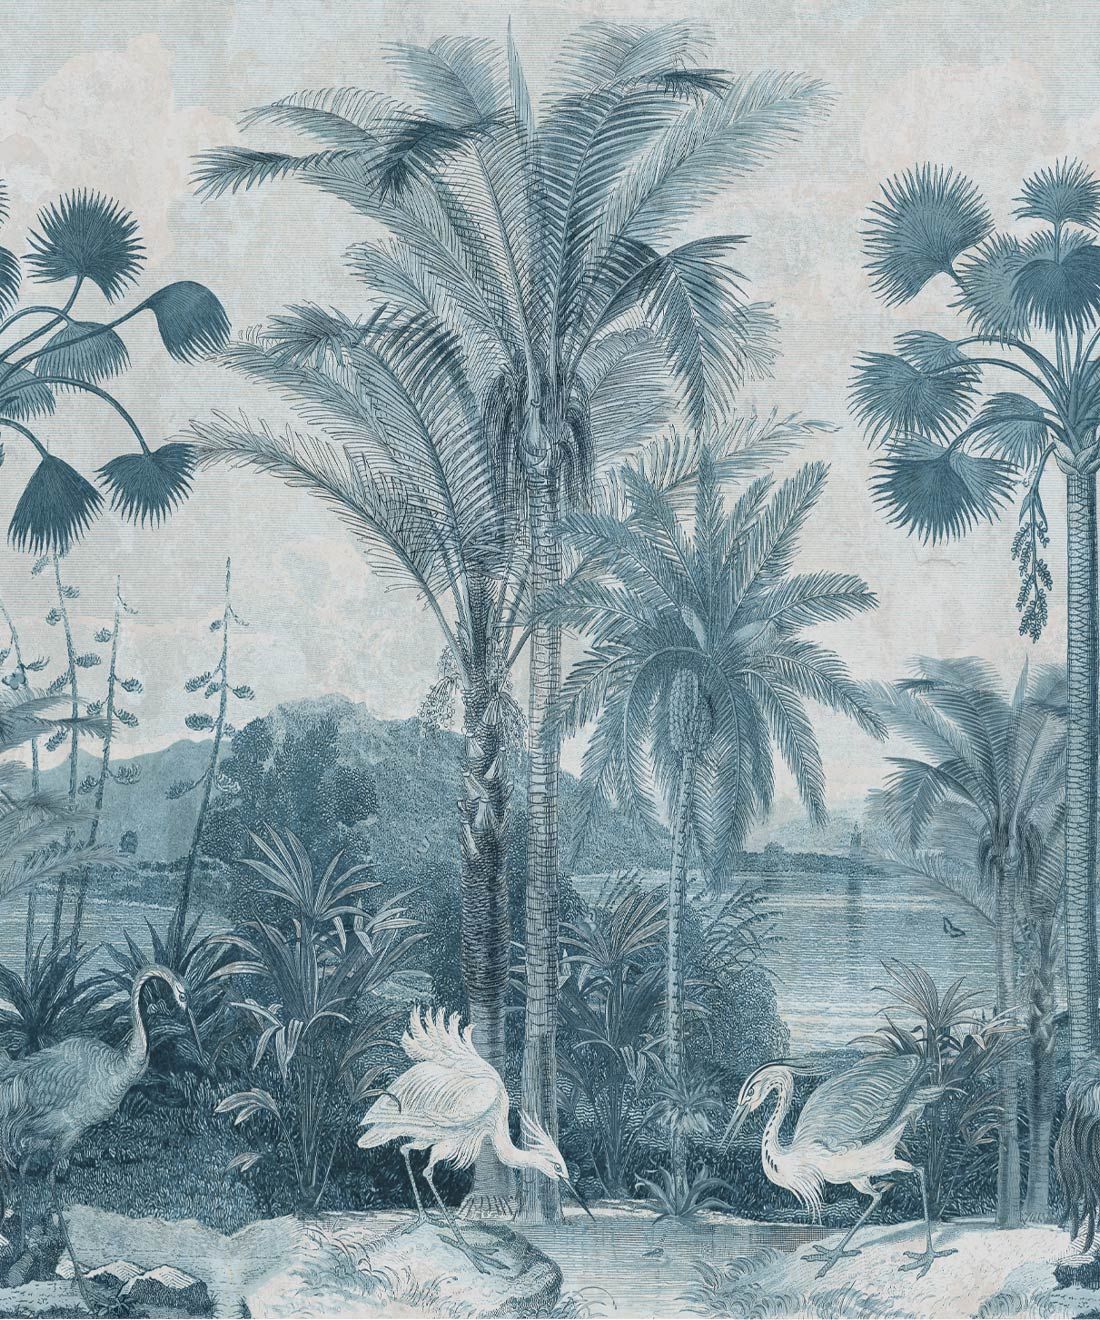 South Asian Subcontinent Wallpaper Mural •Bethany Linz • Palm Tree Mural • Indigo • Swatch